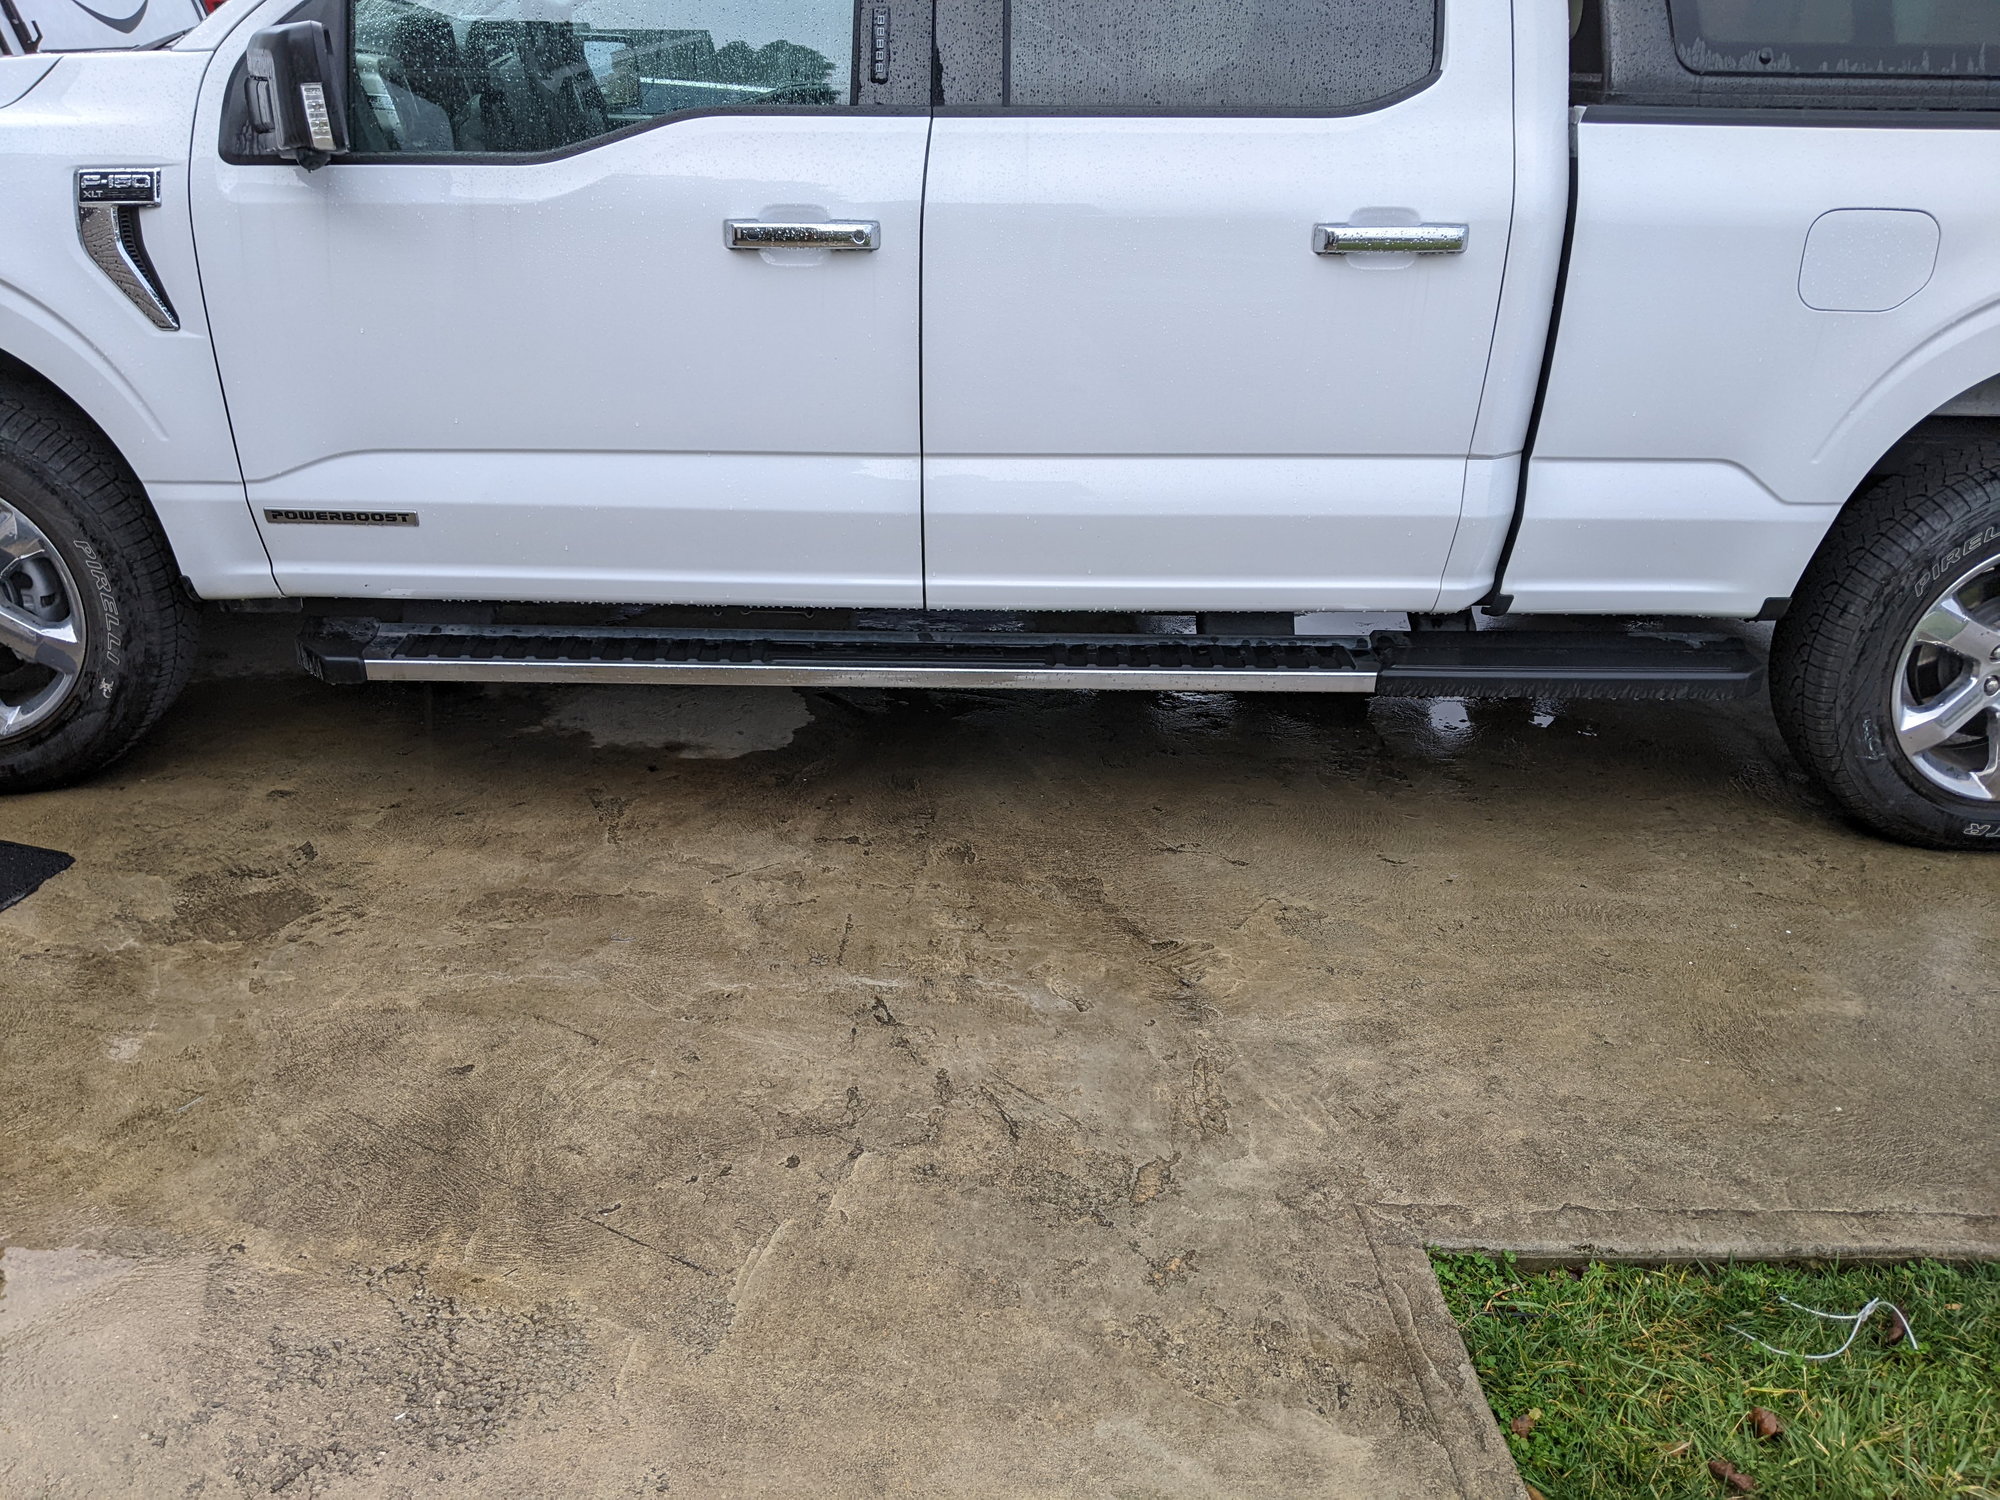 Wheel to Wheel running boards-2021 - Ford F150 Forum - Community of ...